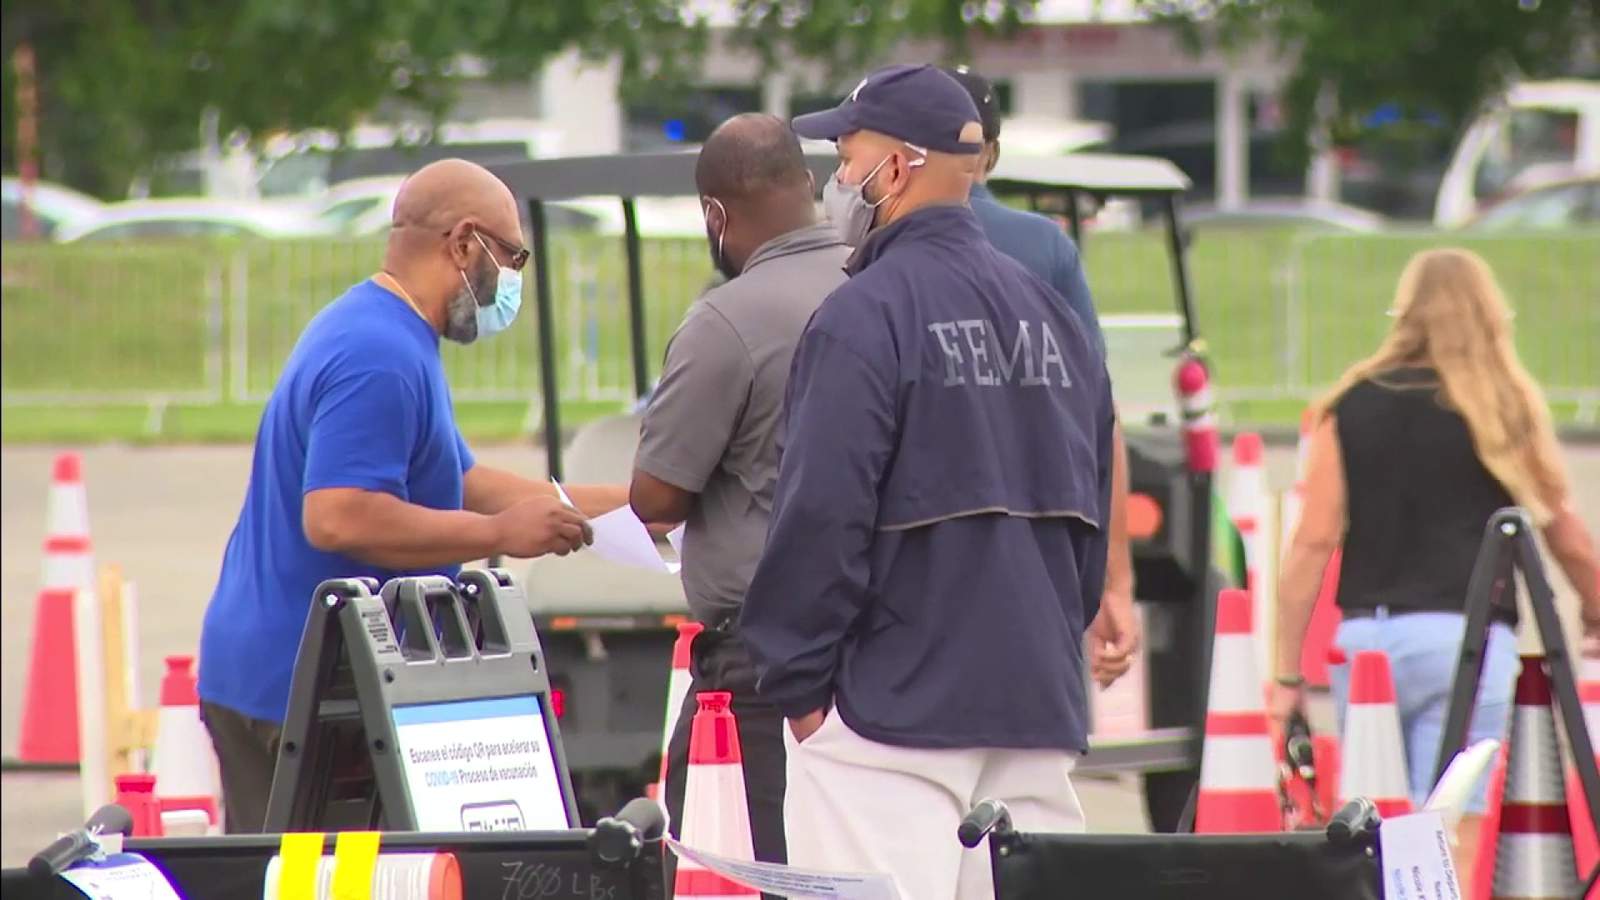 FEMA site at Miami-Dade College sees uptick after Gov. announcement for school employees